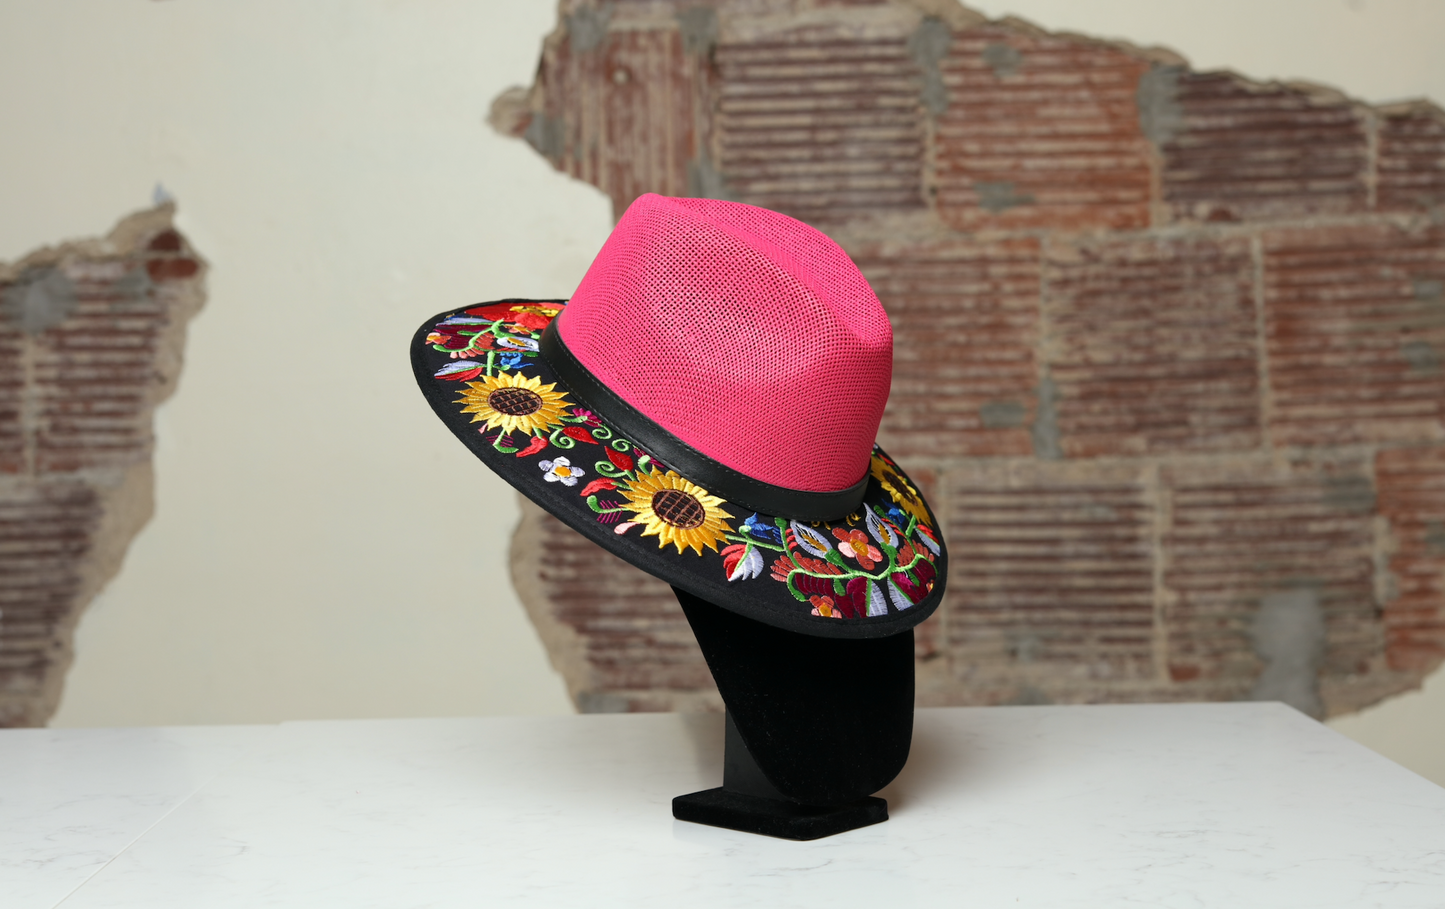 Hand embroidered pink brim hat, the perfect accessory to add fun and style to any outfit. With yellow flowers and green and red leaves as multicultural ornaments.